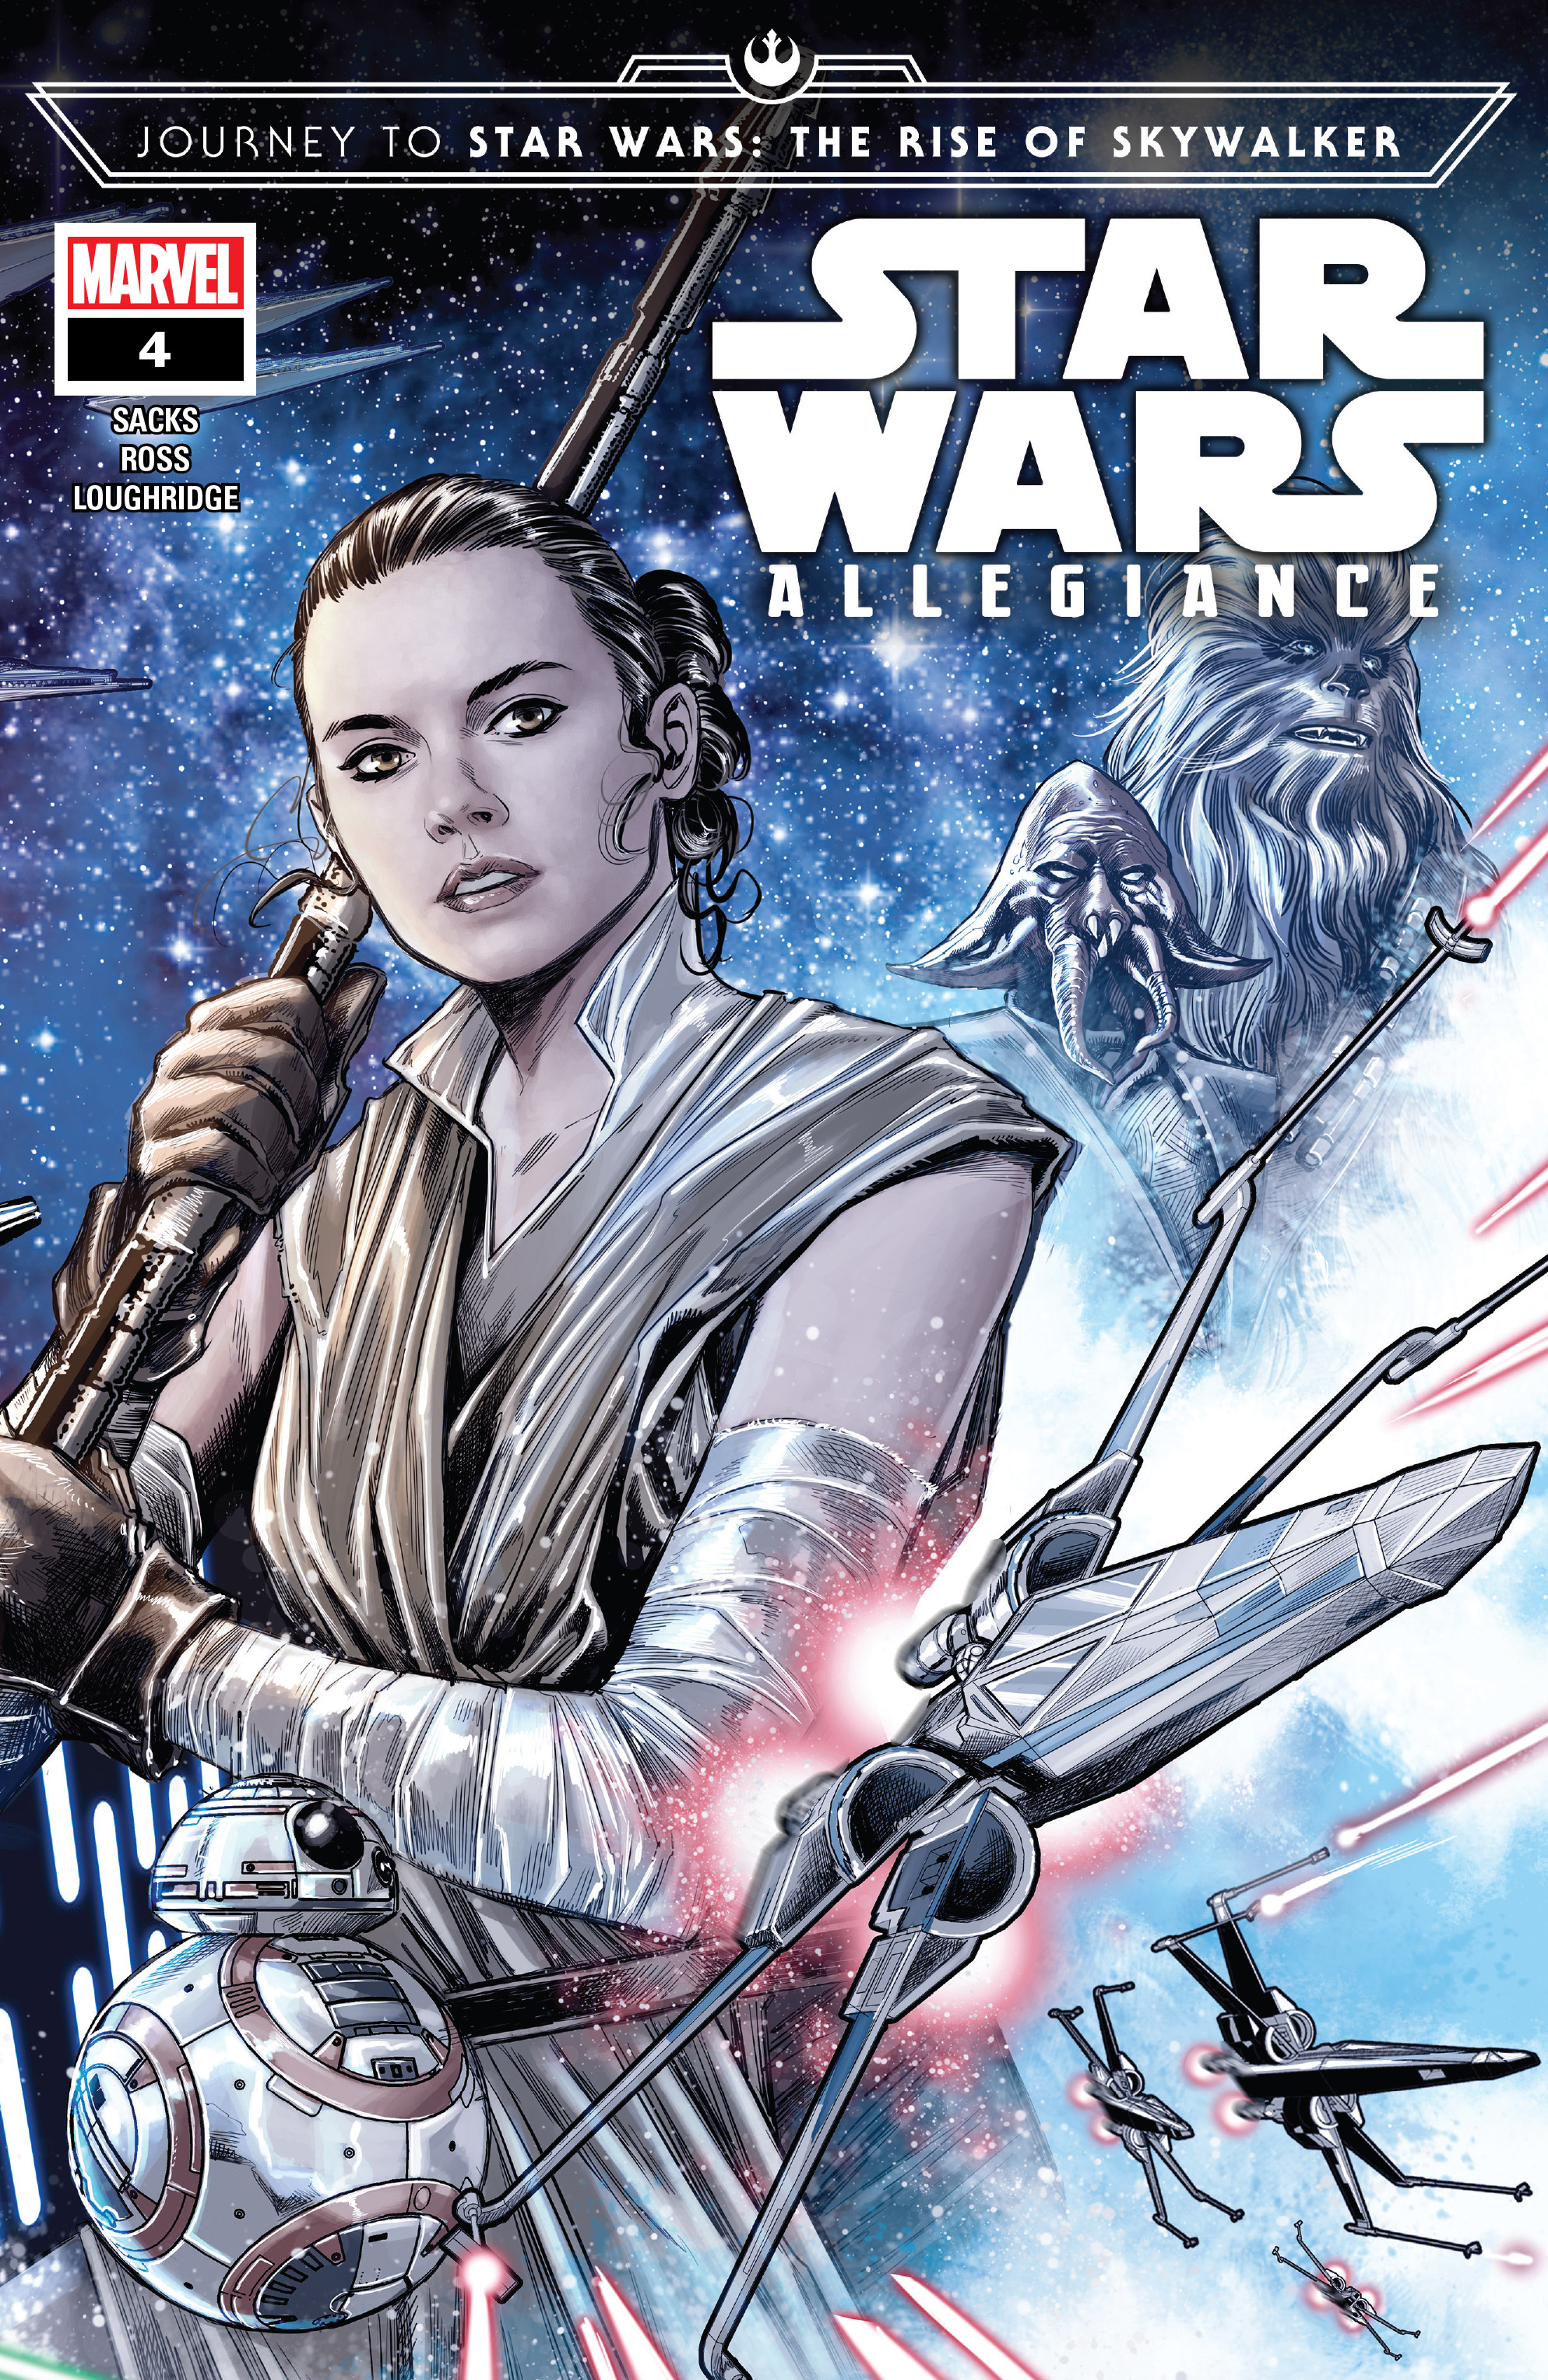 Journey To Star Wars: The Rise Of Skywalker - Allegiance (2019): Chapter 4 - Page 1